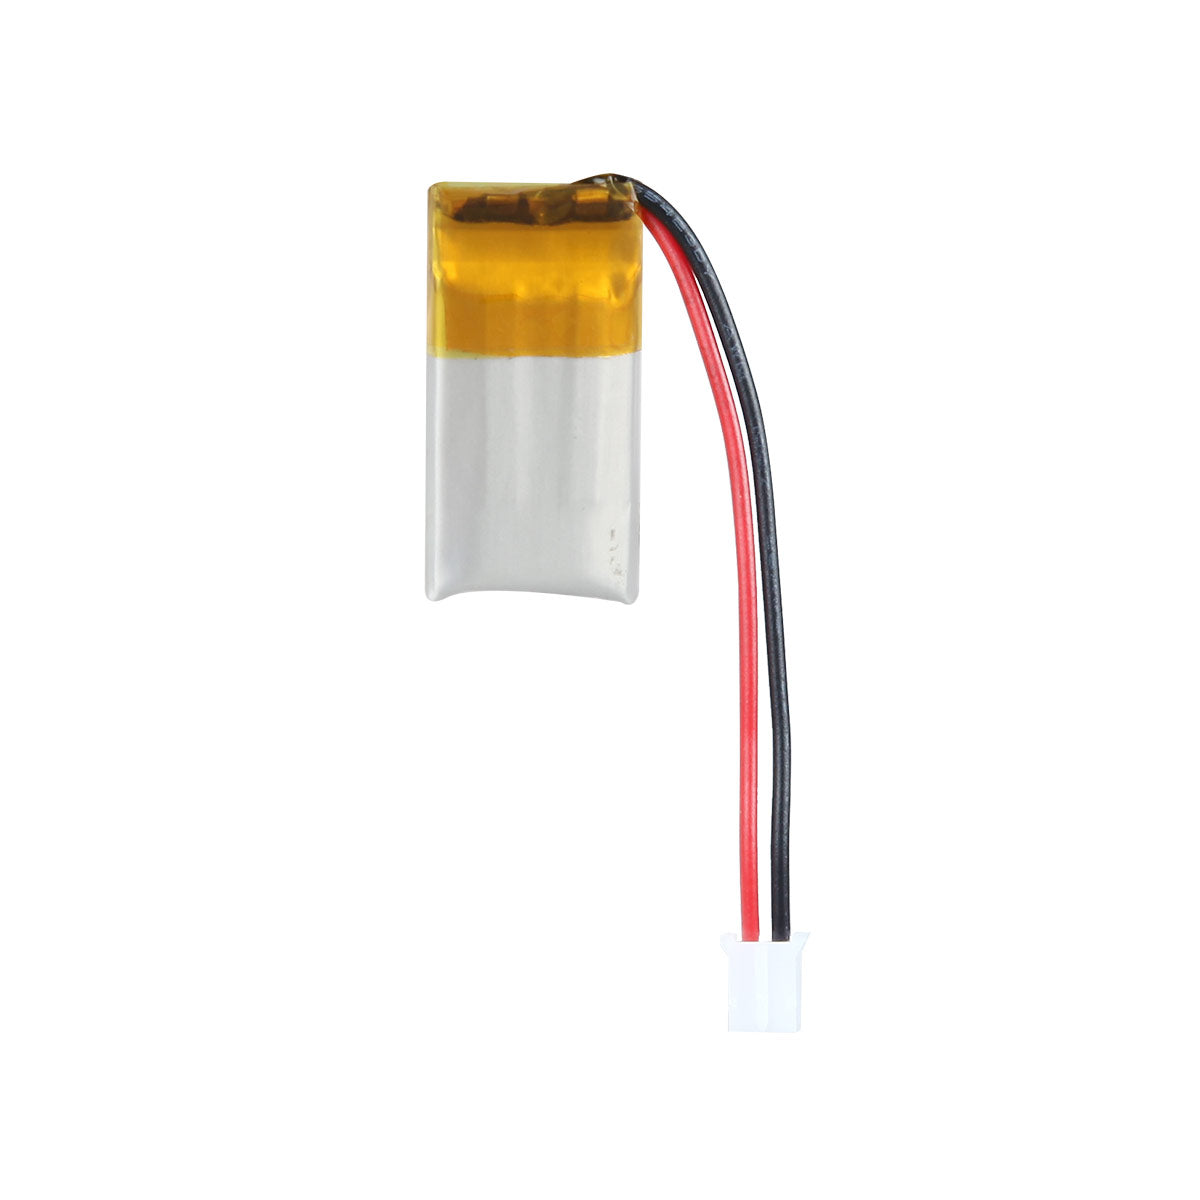 YDL 3.7V 55mAh 351020/351120 Rechargeable Lithium Polymer Battery Length 22mm